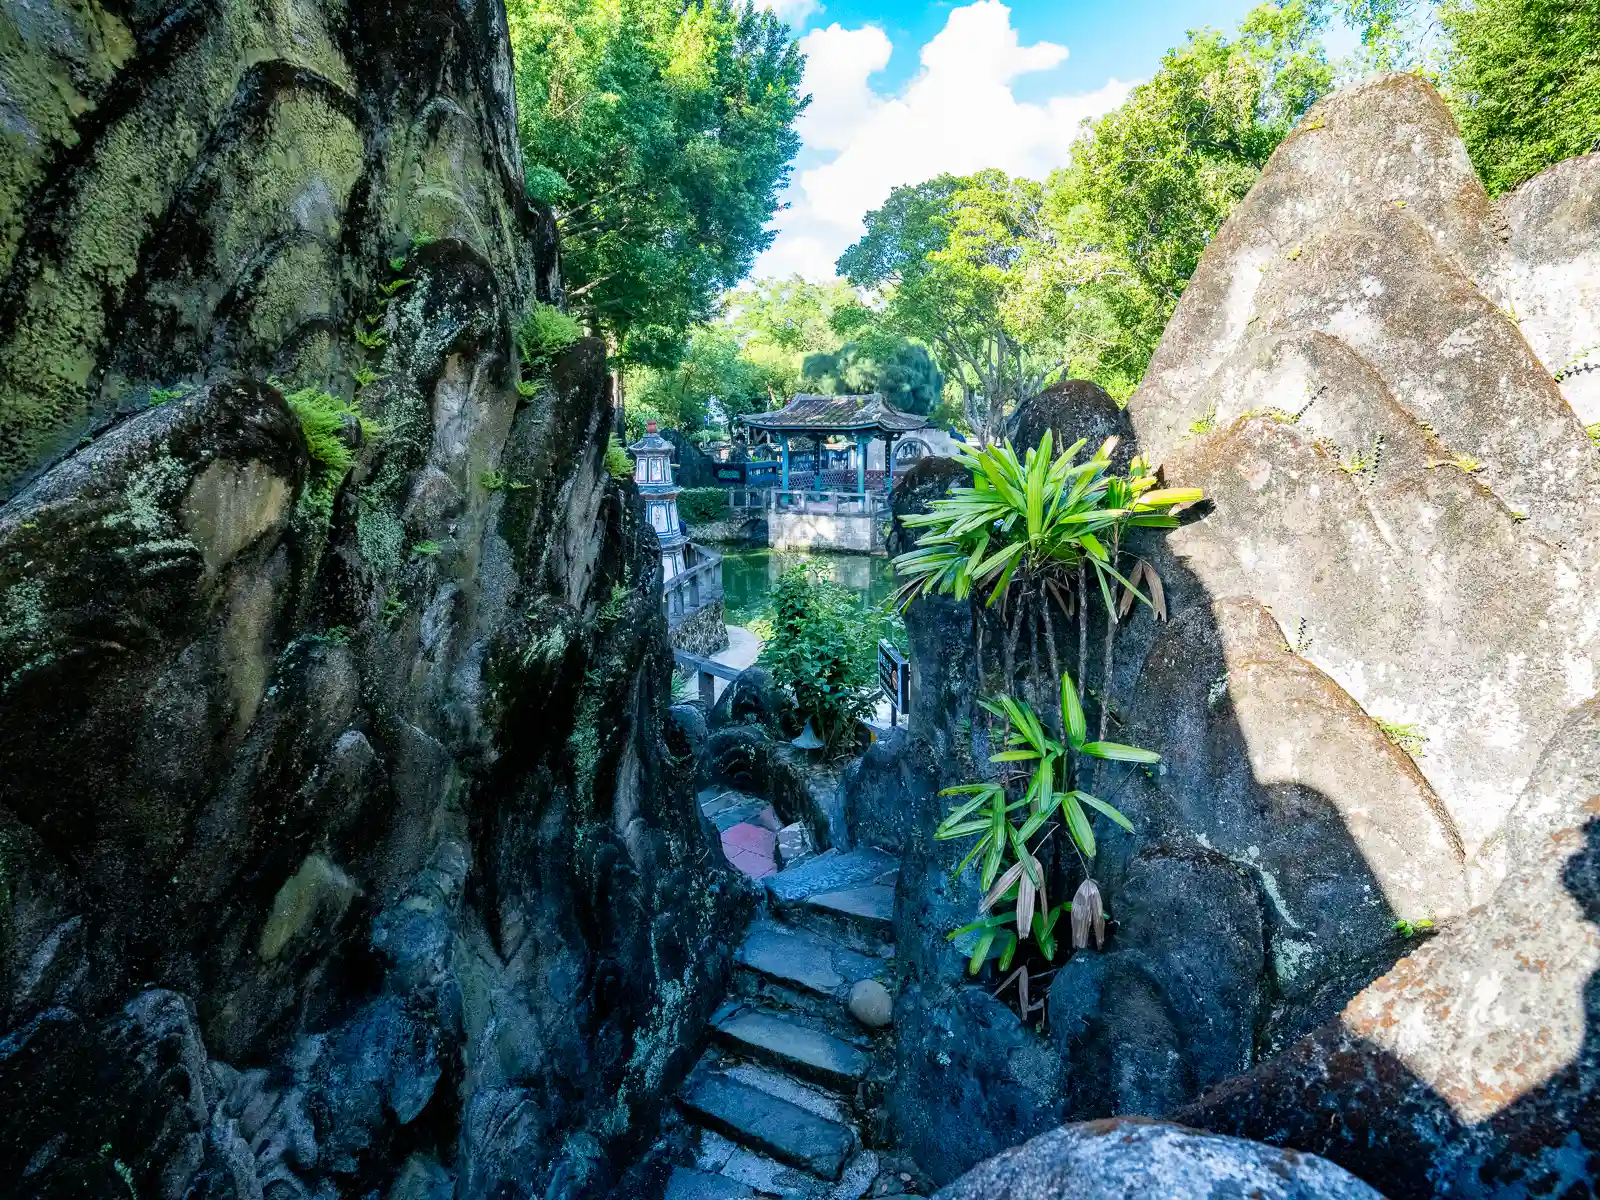 The garden path winds between several large boulders before opening up to a pond.